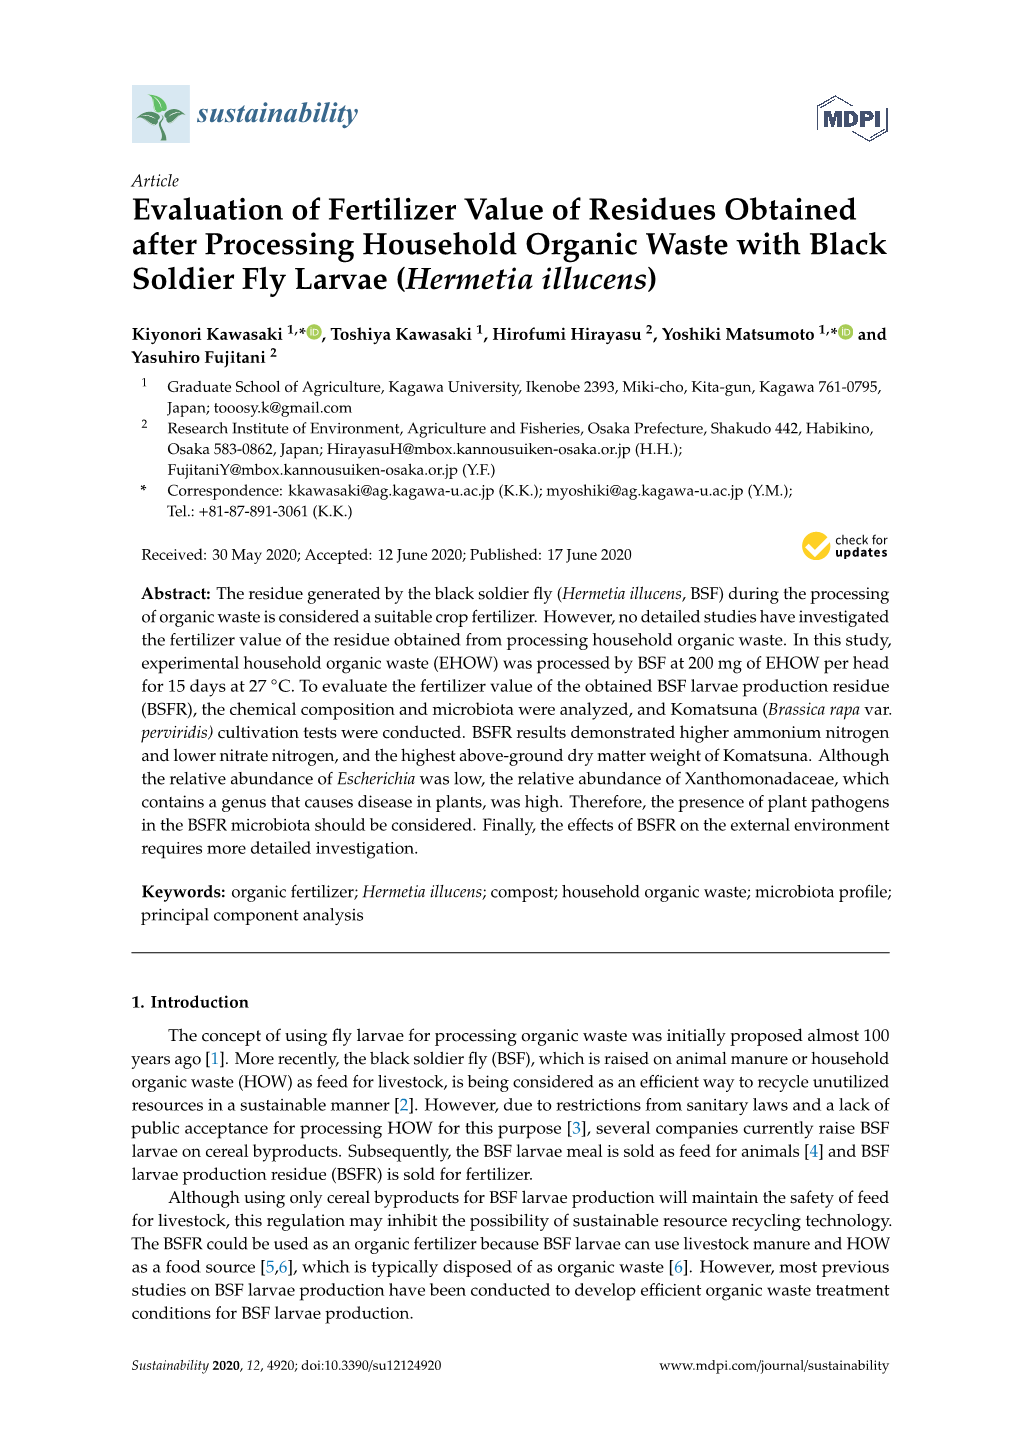 Evaluation of Fertilizer Value of Residues Obtained After Processing Household Organic Waste with Black Soldier Fly Larvae (Hermetia Illucens)